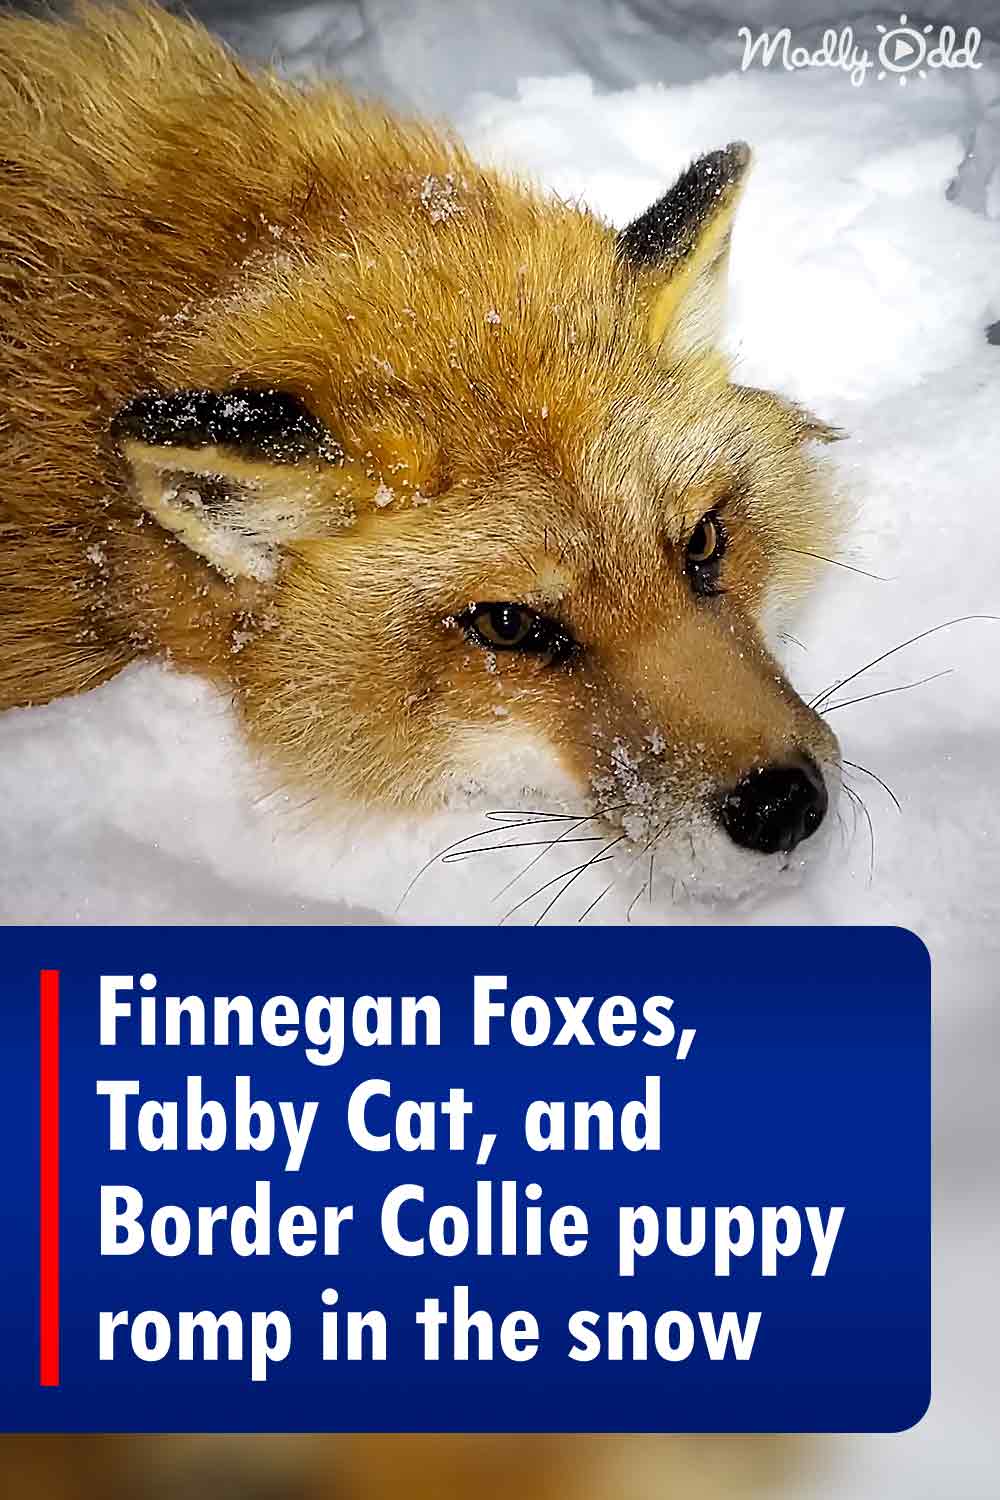 Finnegan Foxes, Tabby Cat, and Border Collie puppy romp in the snow